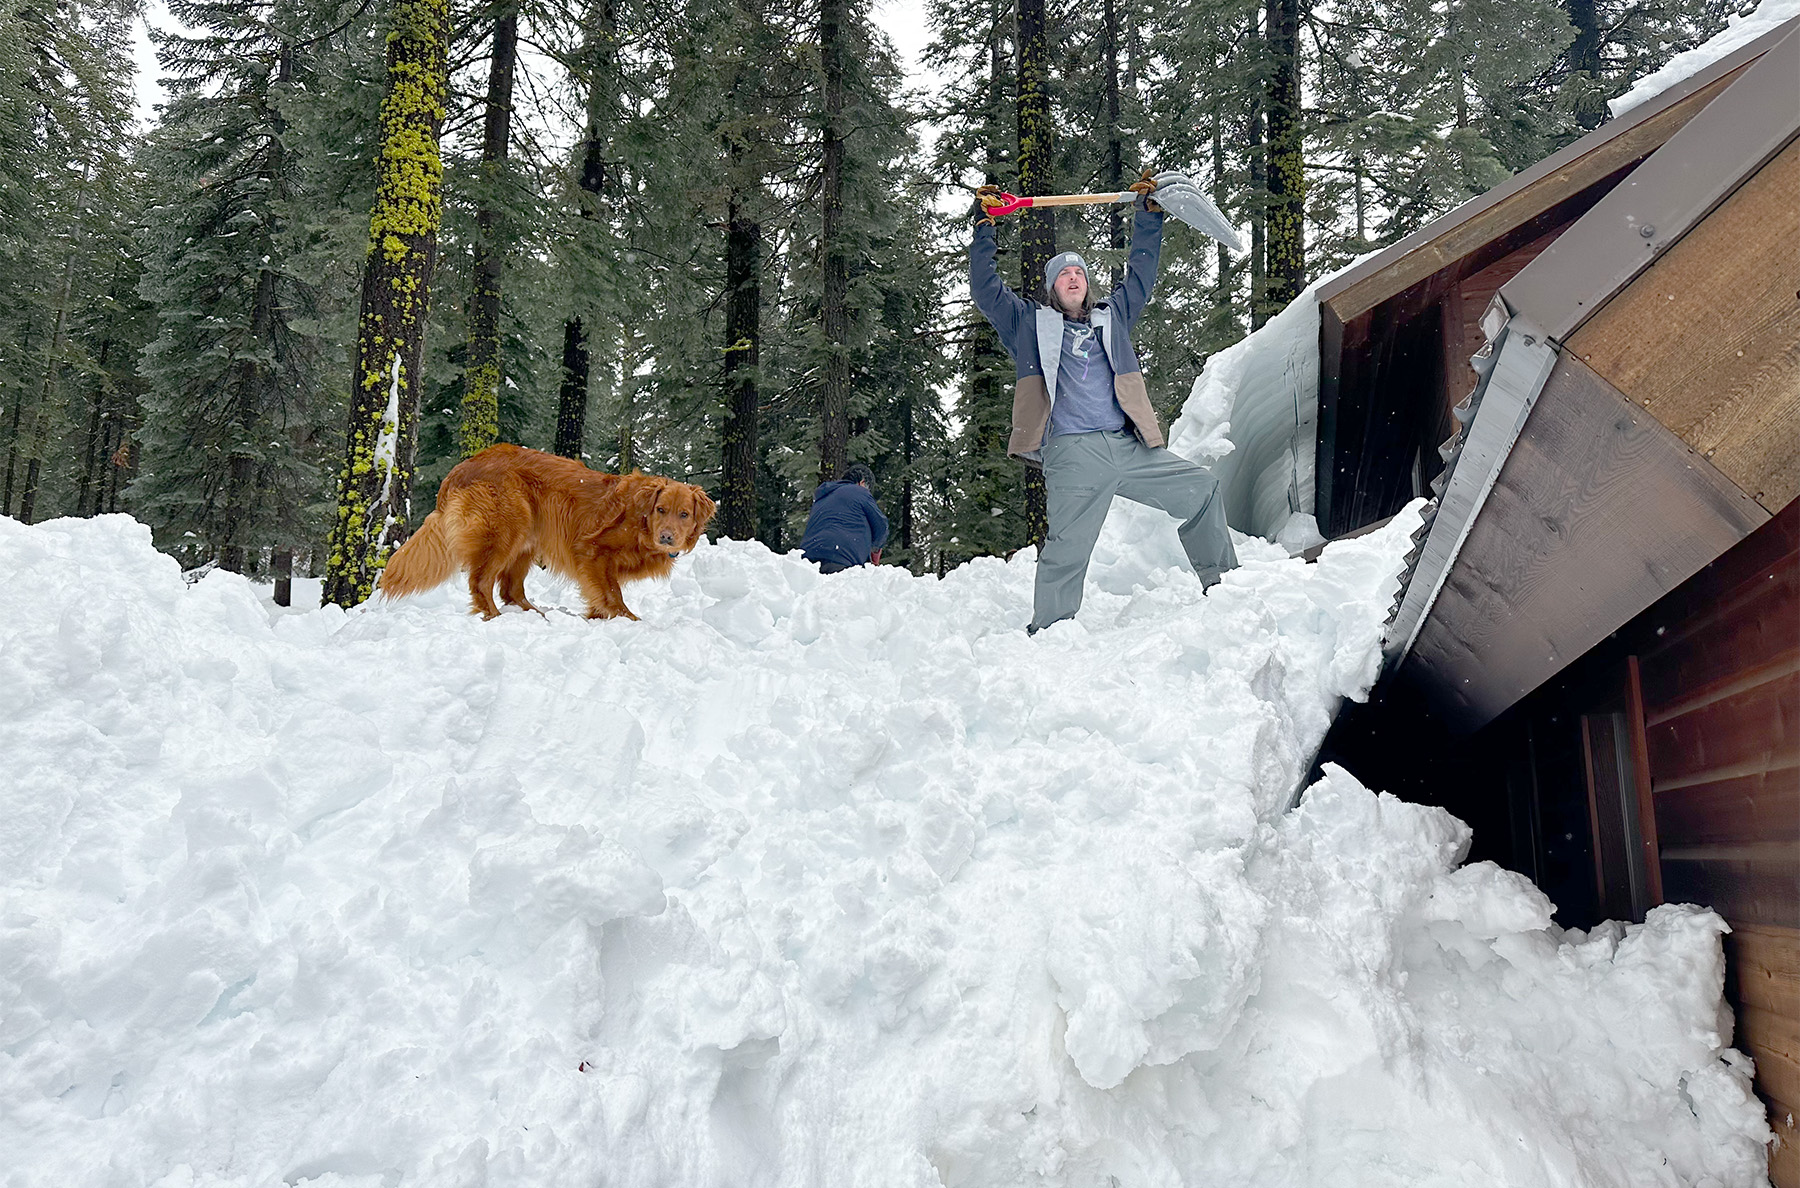 Mountain Gazette editor / owner, Mike Rogge, is back on the Blister Podcast to discuss this historic winter in Tahoe; urban through hikes; mutton busting; and more.